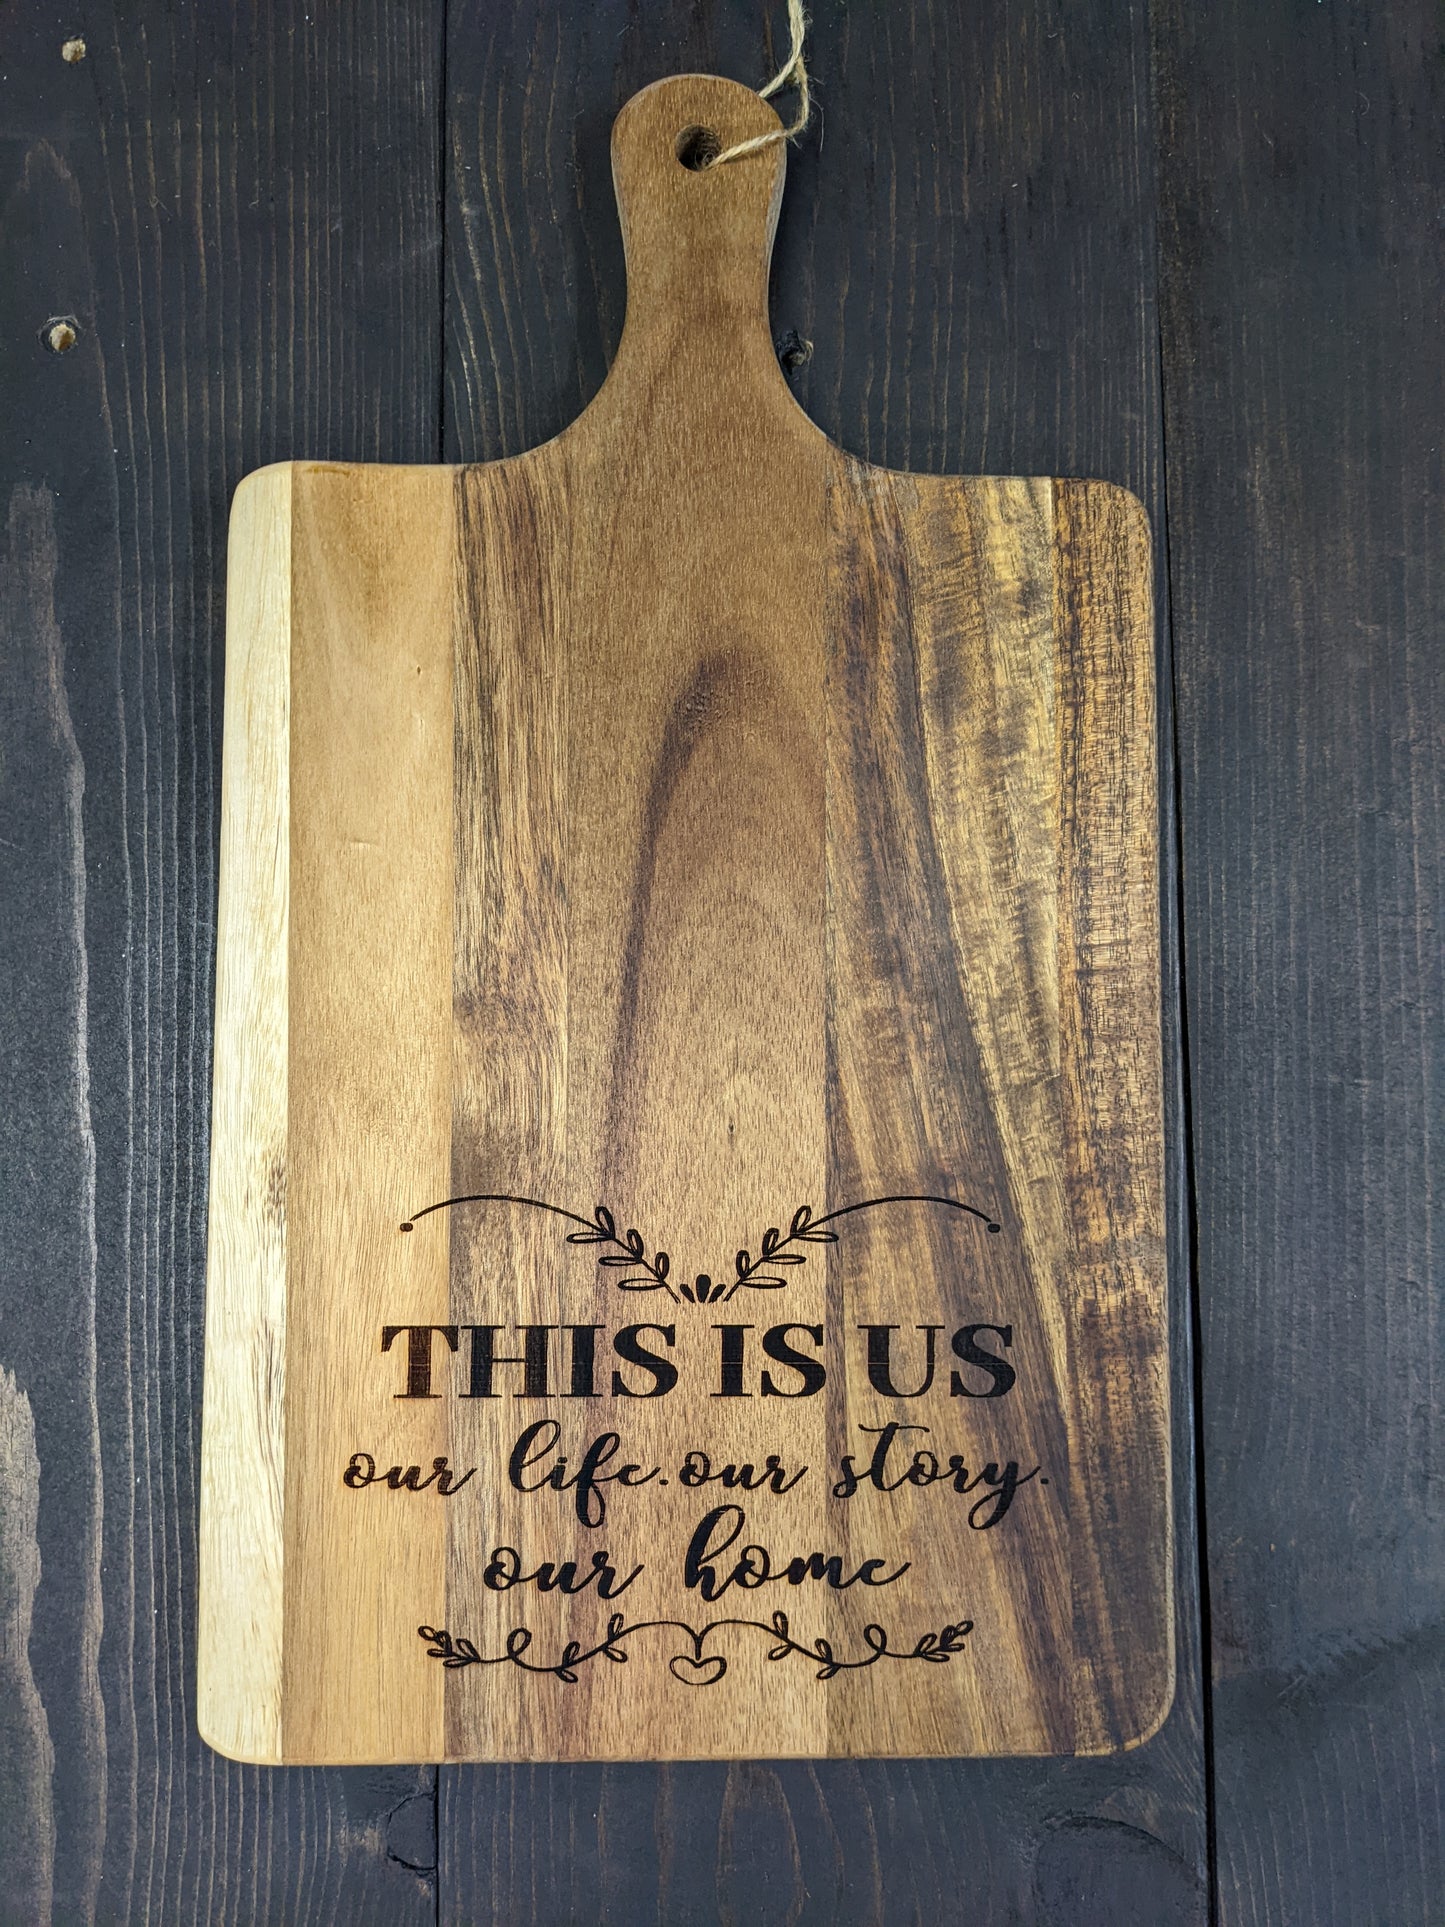 Cutting board- "This is us our life"